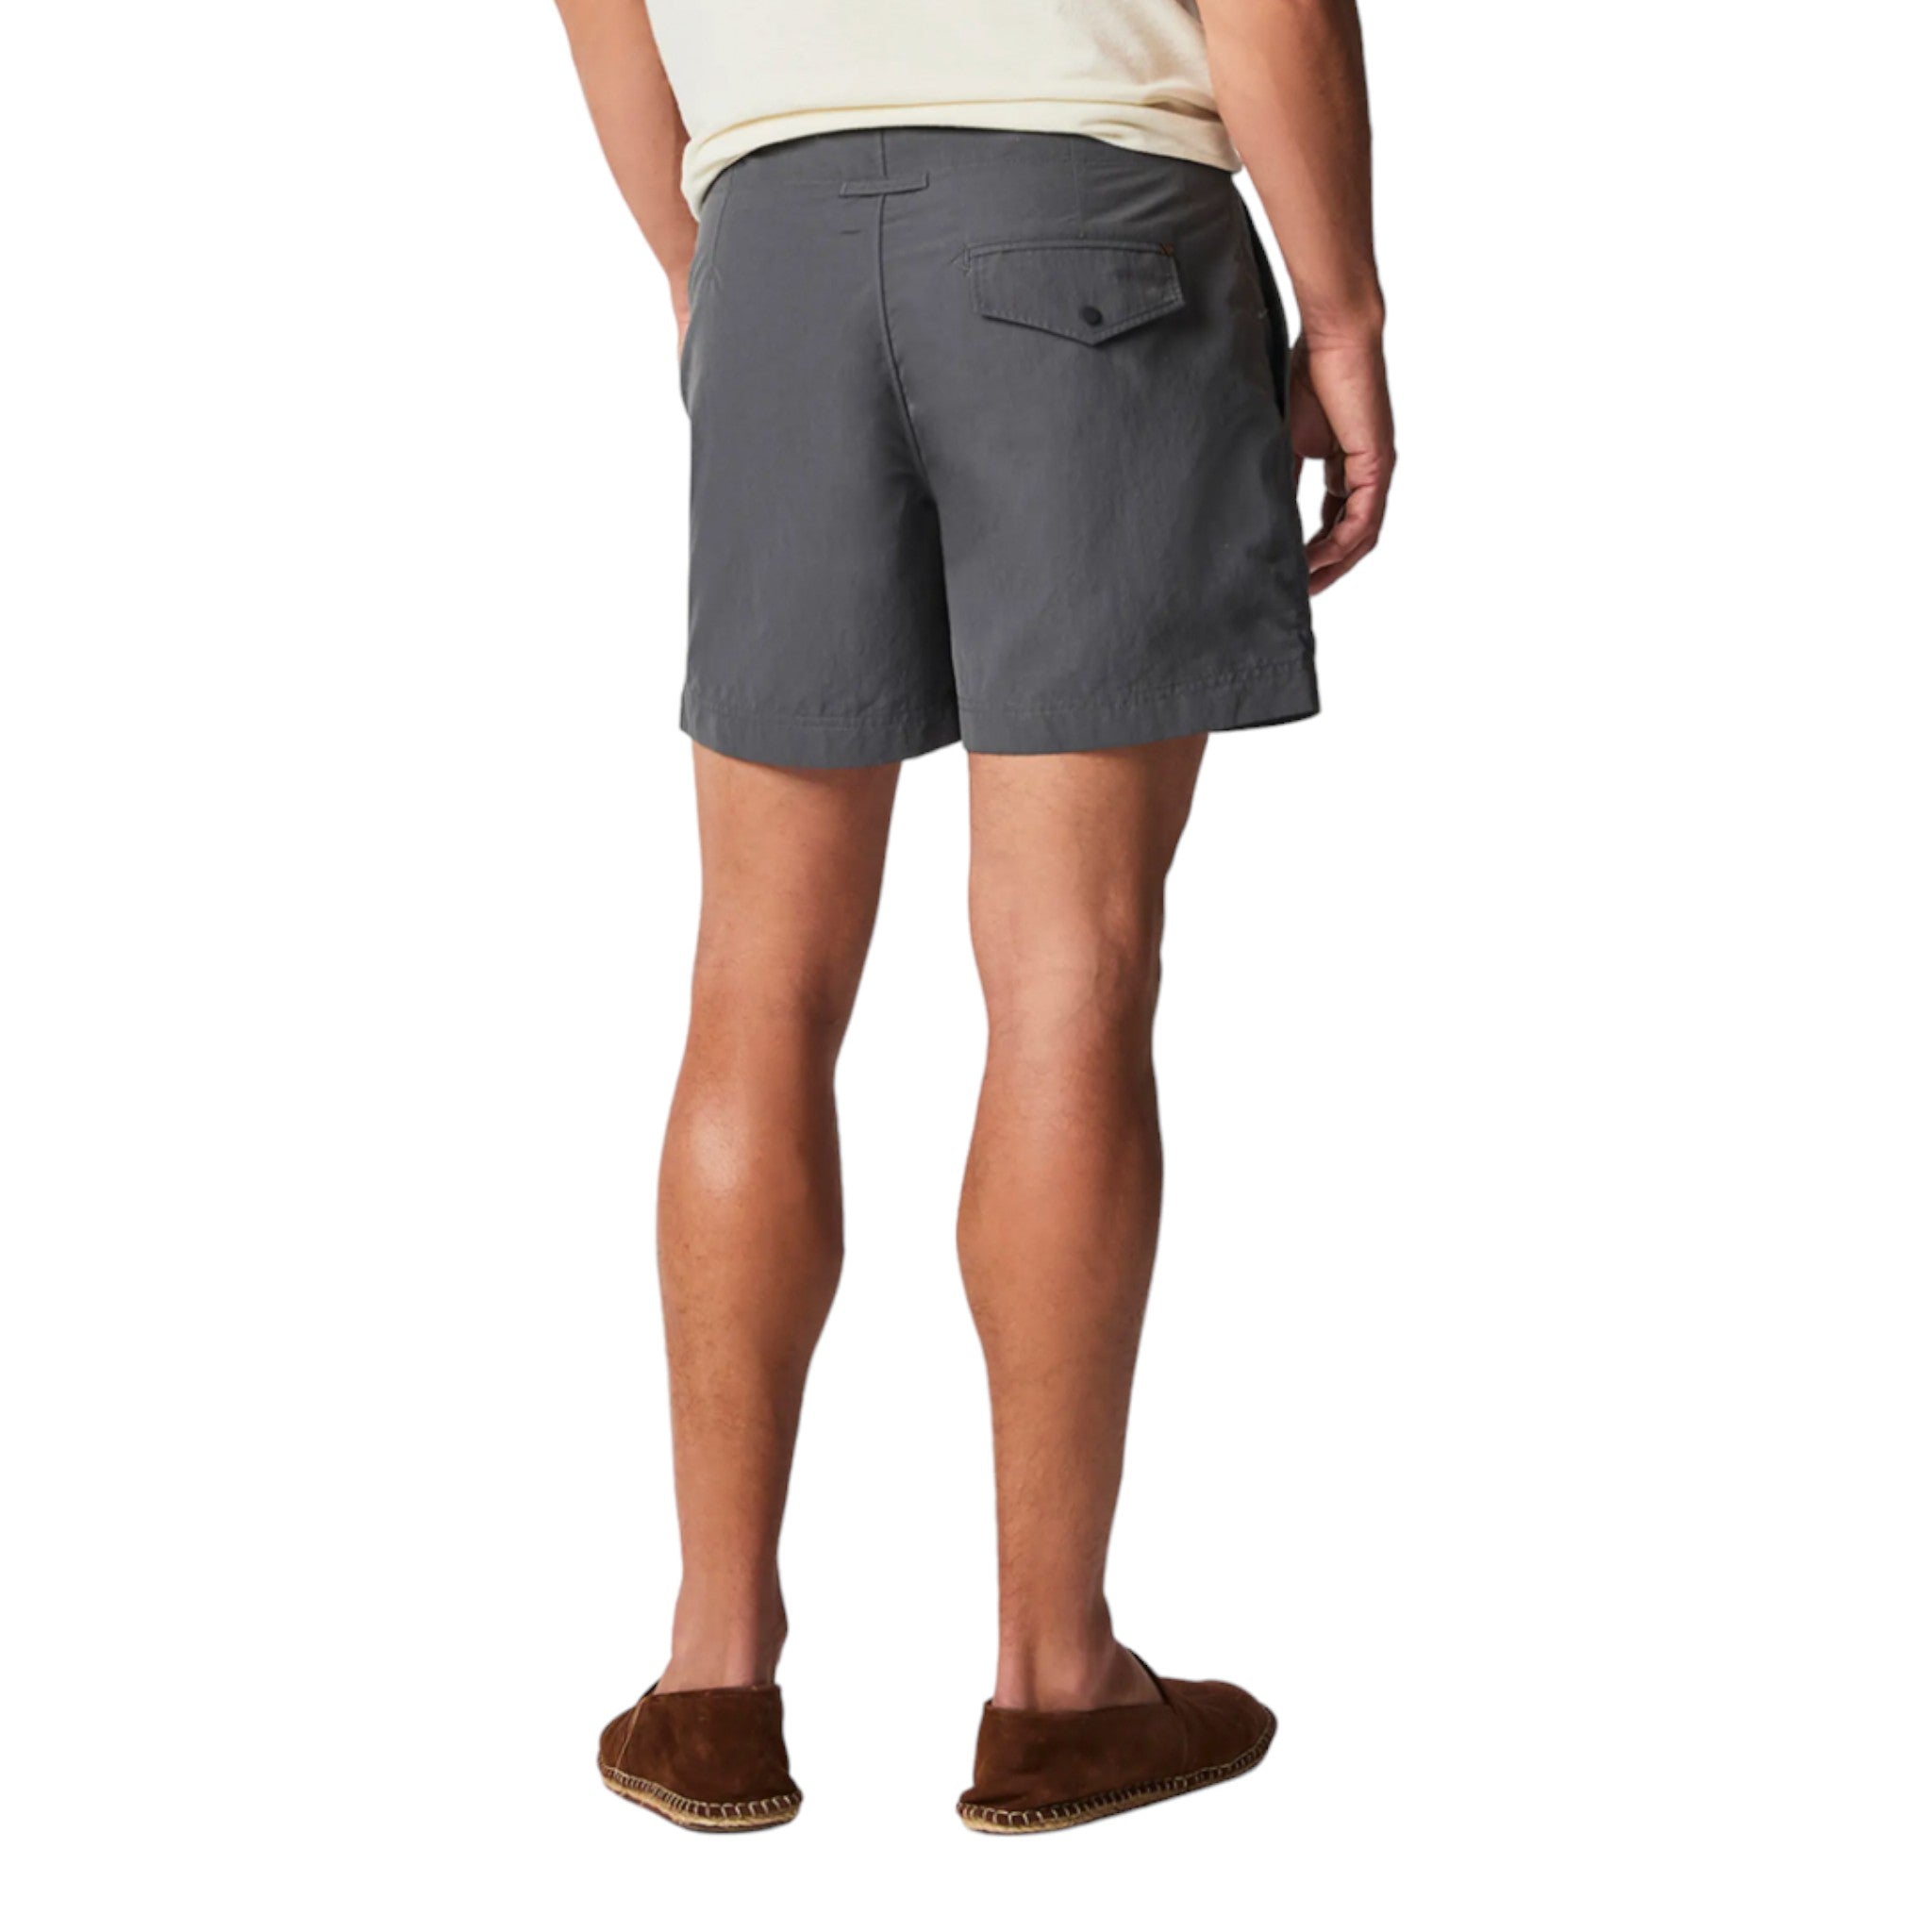 Grey shorts with button and zip closure